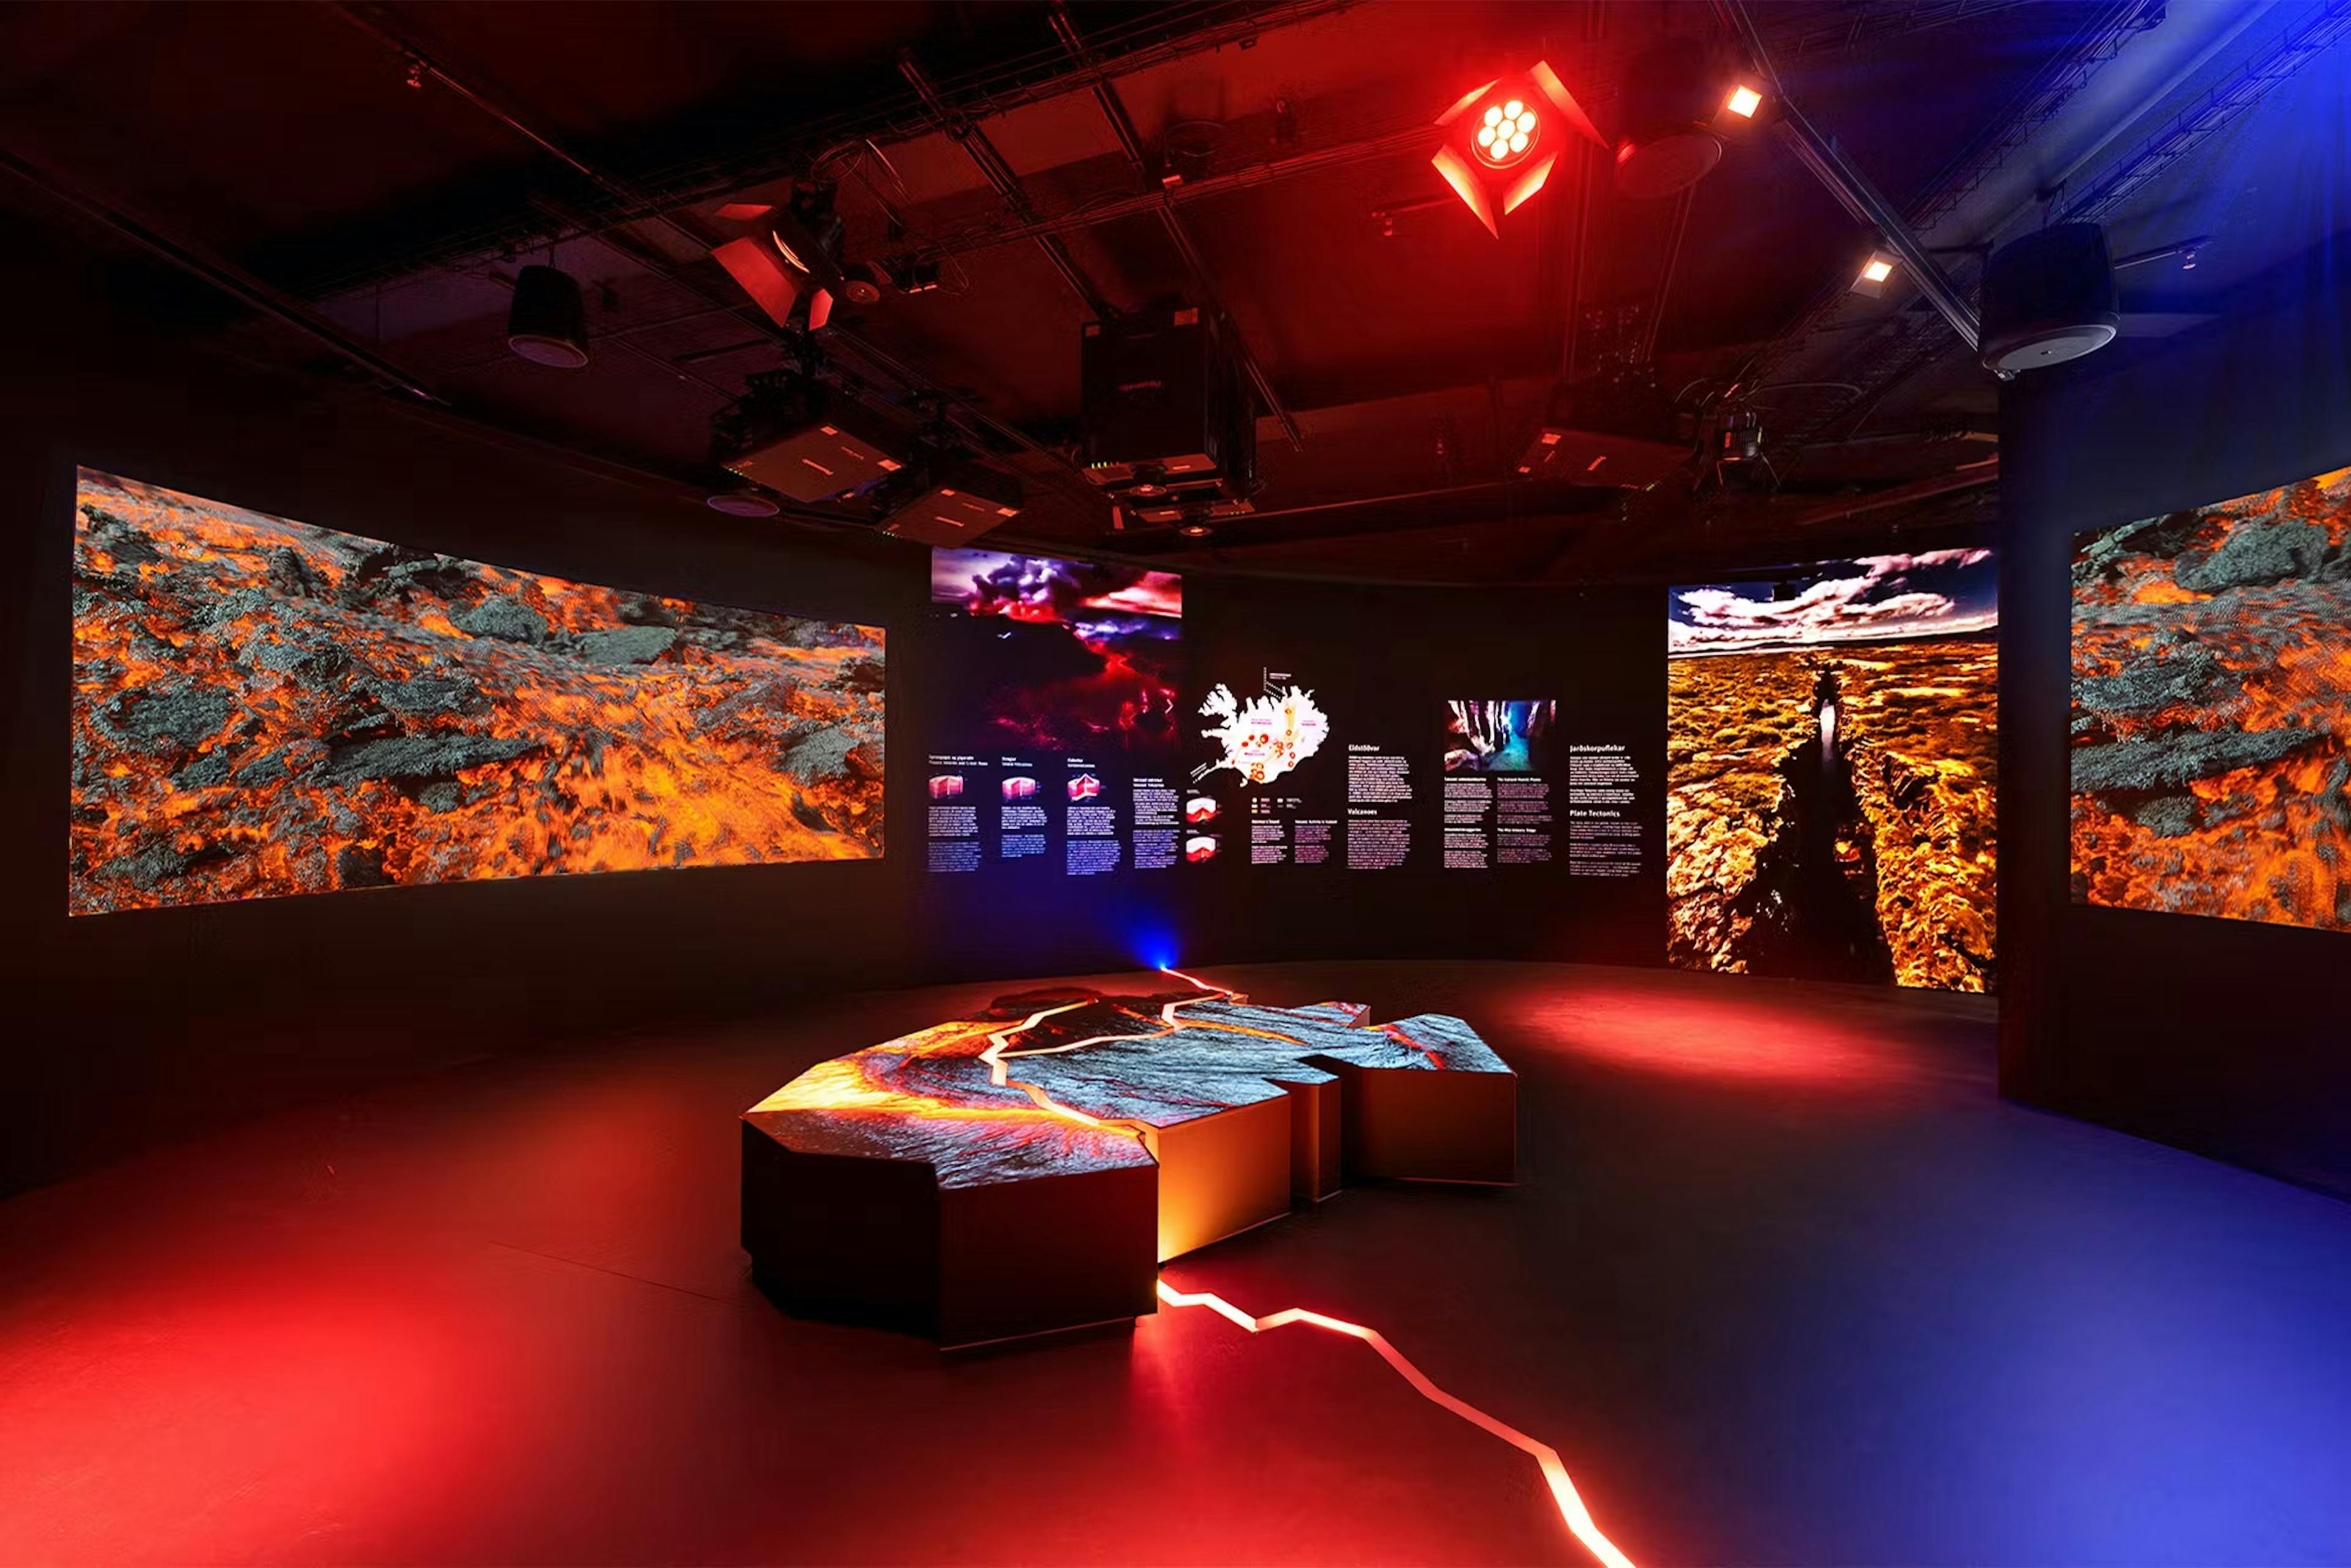 Perlan's Forces of Nature exhibition